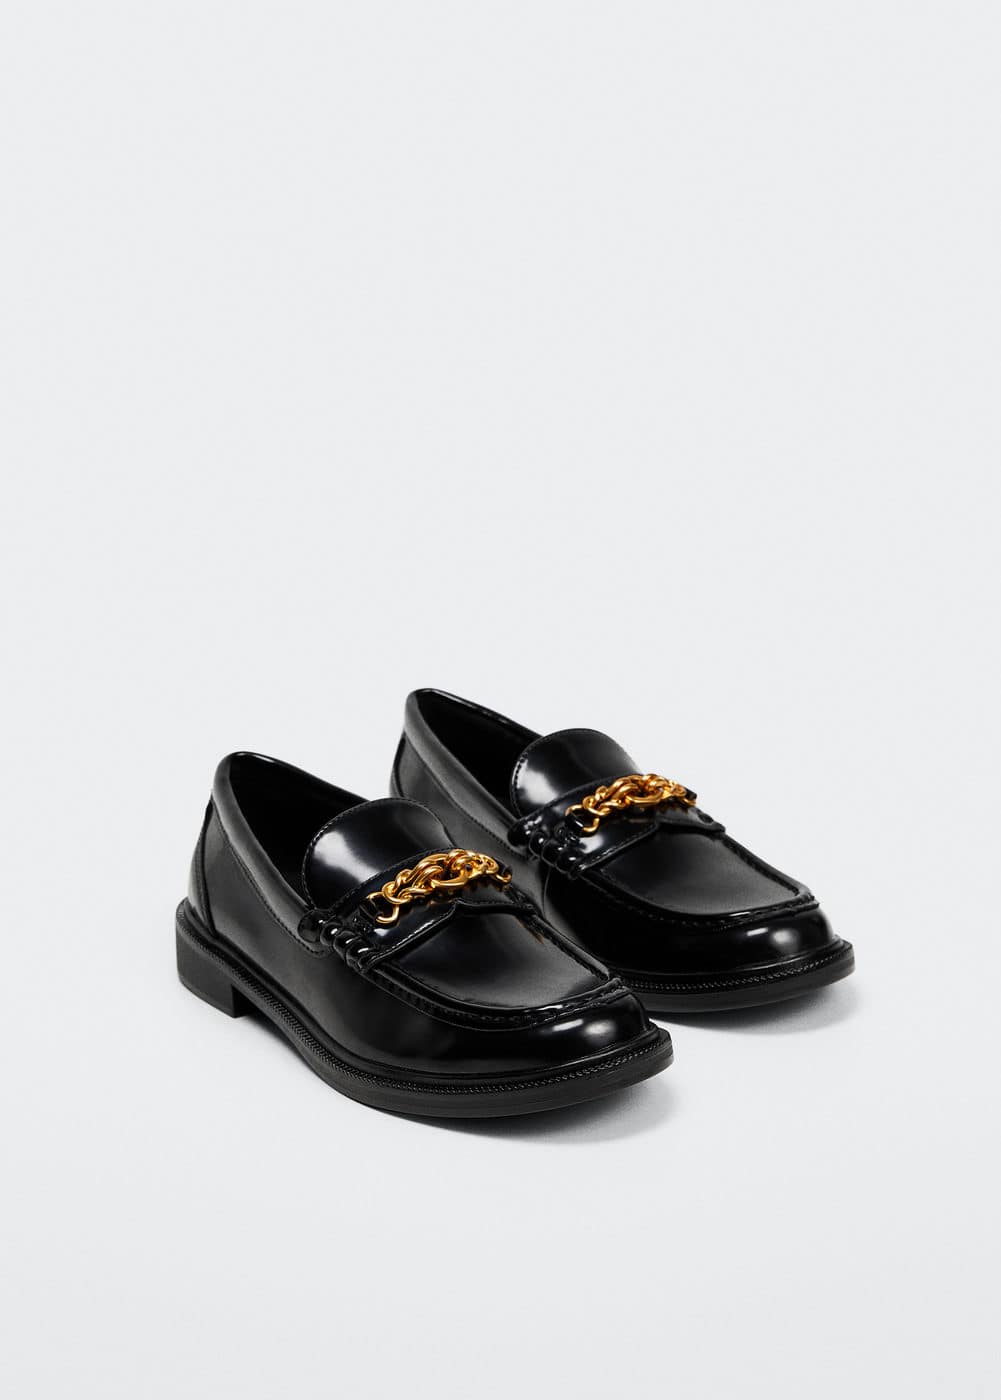 I Can't Believe These Shockingly Pretty Shoes Are From Mango | What Wear